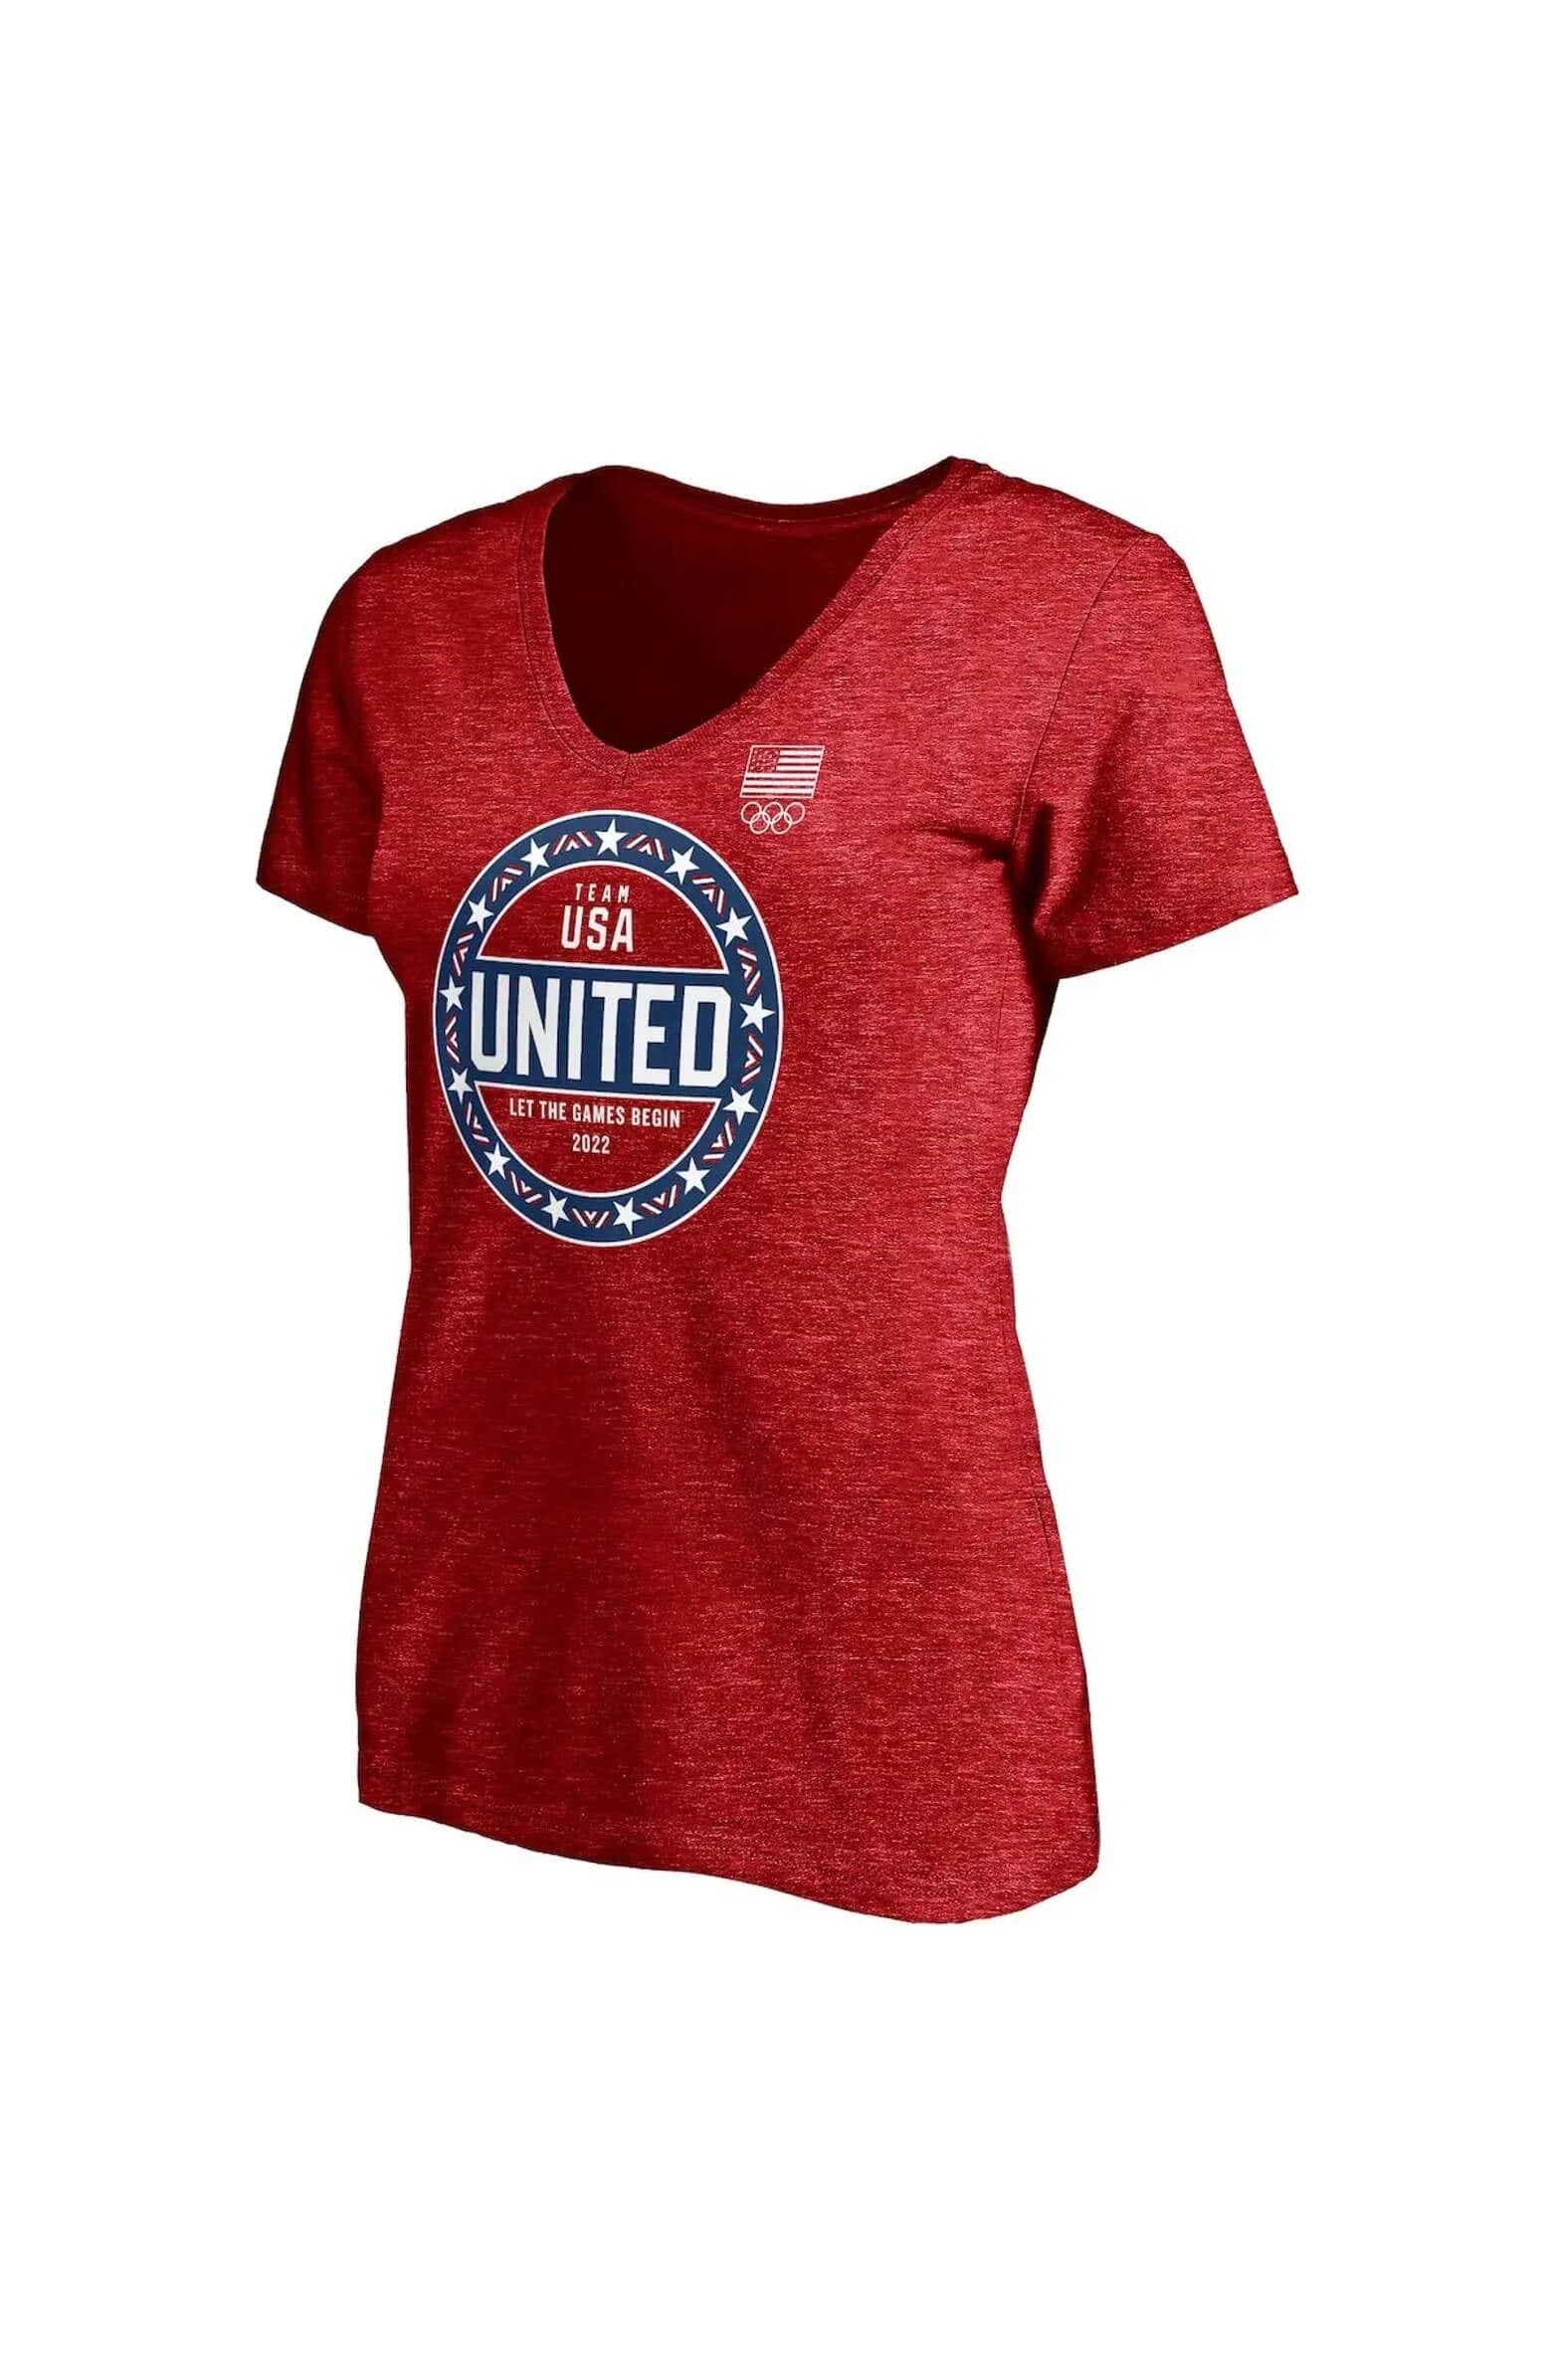 red v-neck shirt with united states olympics graphic